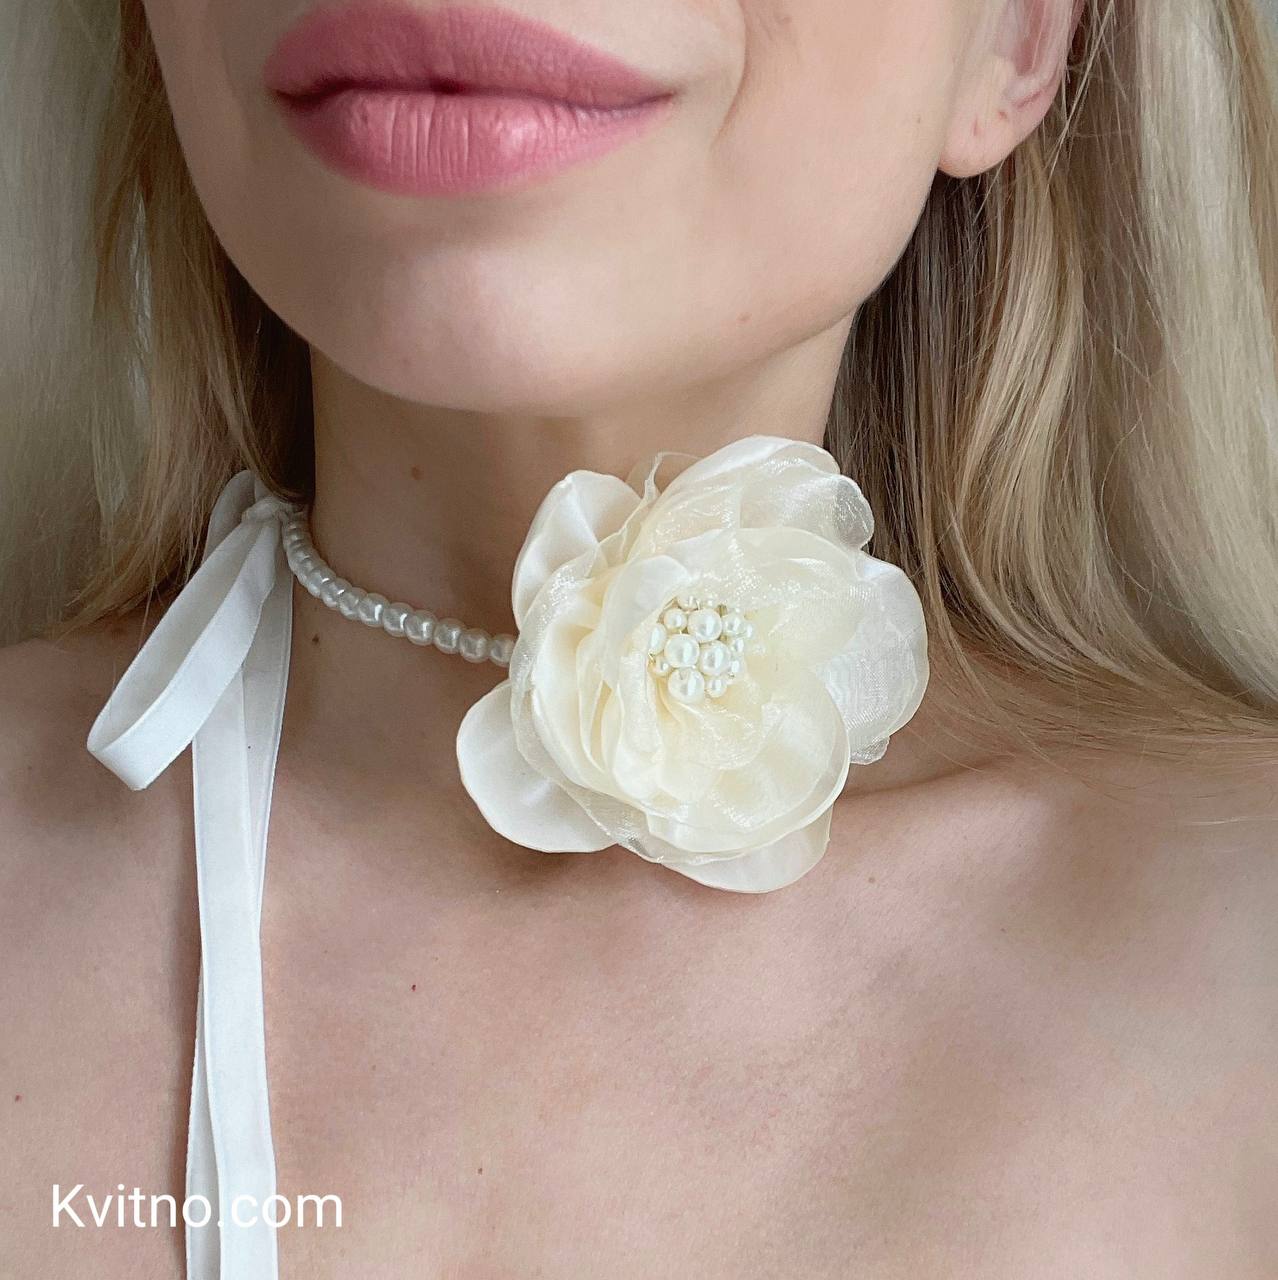 Ivory Elegant Faux Pearl Flower Choker Necklace - The Perfect Bridal Accessory for Weddings and Formal Events